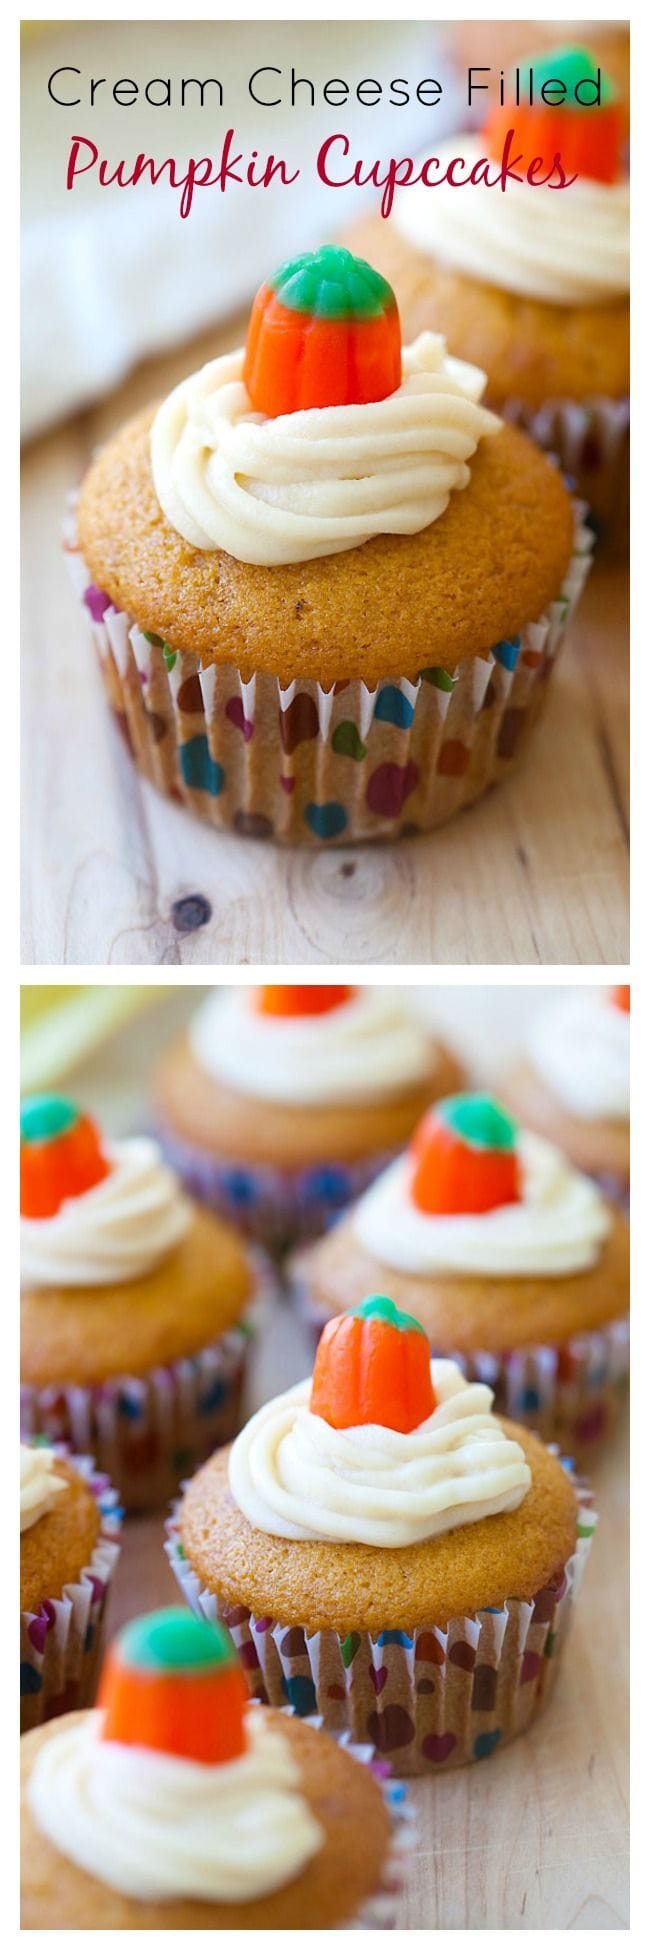 Cream Cheese Filled Pumpkin Cupcakes – rich cream cheese filled inside these amazing pumpkin cupcakes. Every bite is creamy and decadent, so yummy | rasamalaysia.com